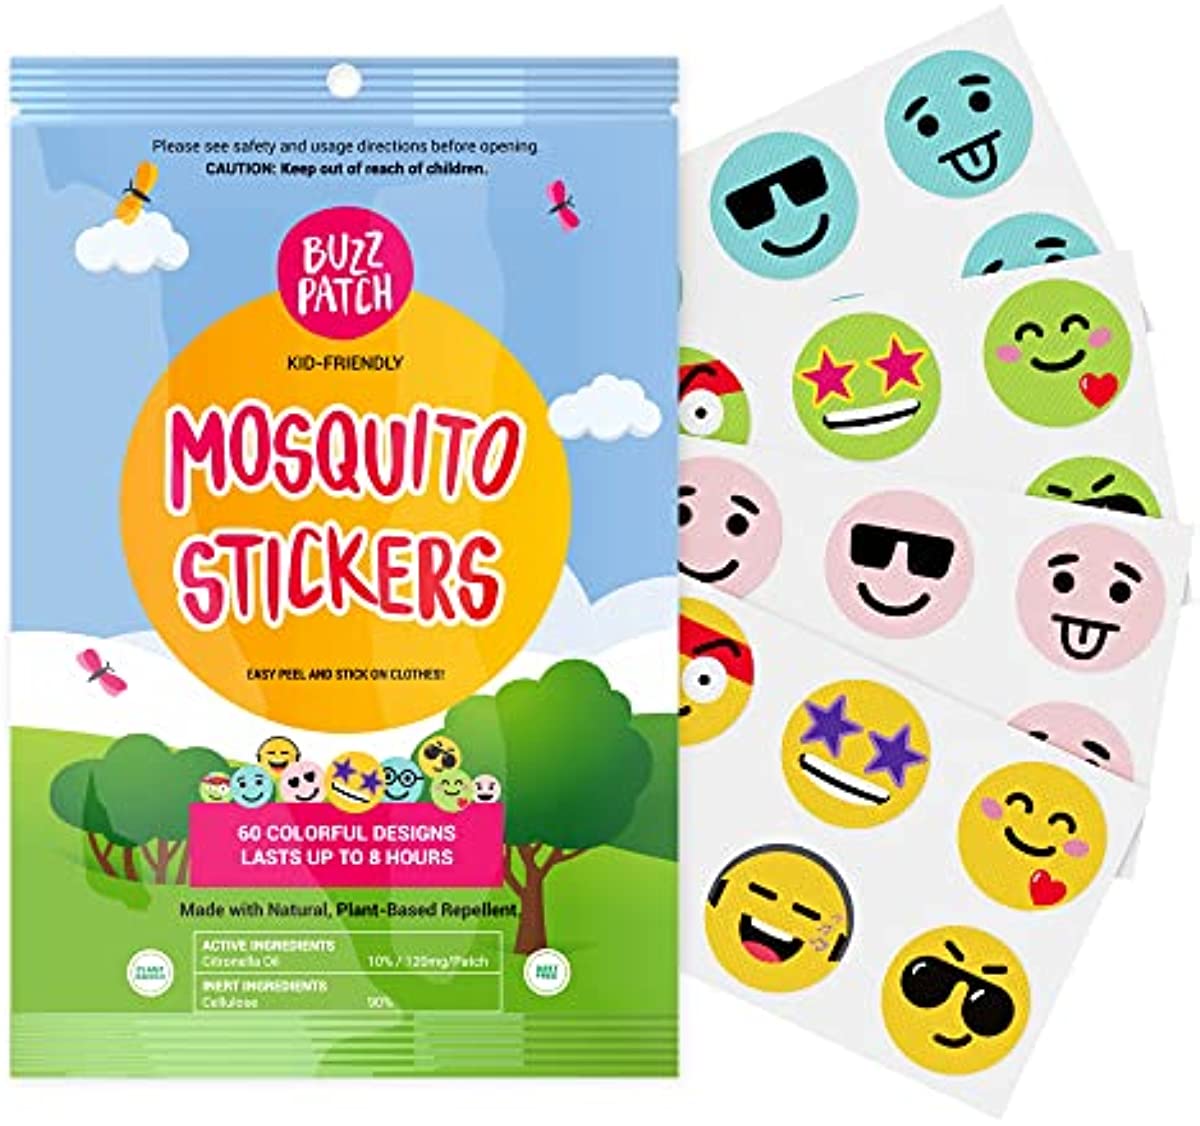 BuzzPatch Mosquito Patch Stickers for Kids (60 Pack) - The Original All Natural, Plant Based Ingredients, Non-Toxic, DEET Free, Citronella Essential Oil Insect Patch, for Toddlers, Kids